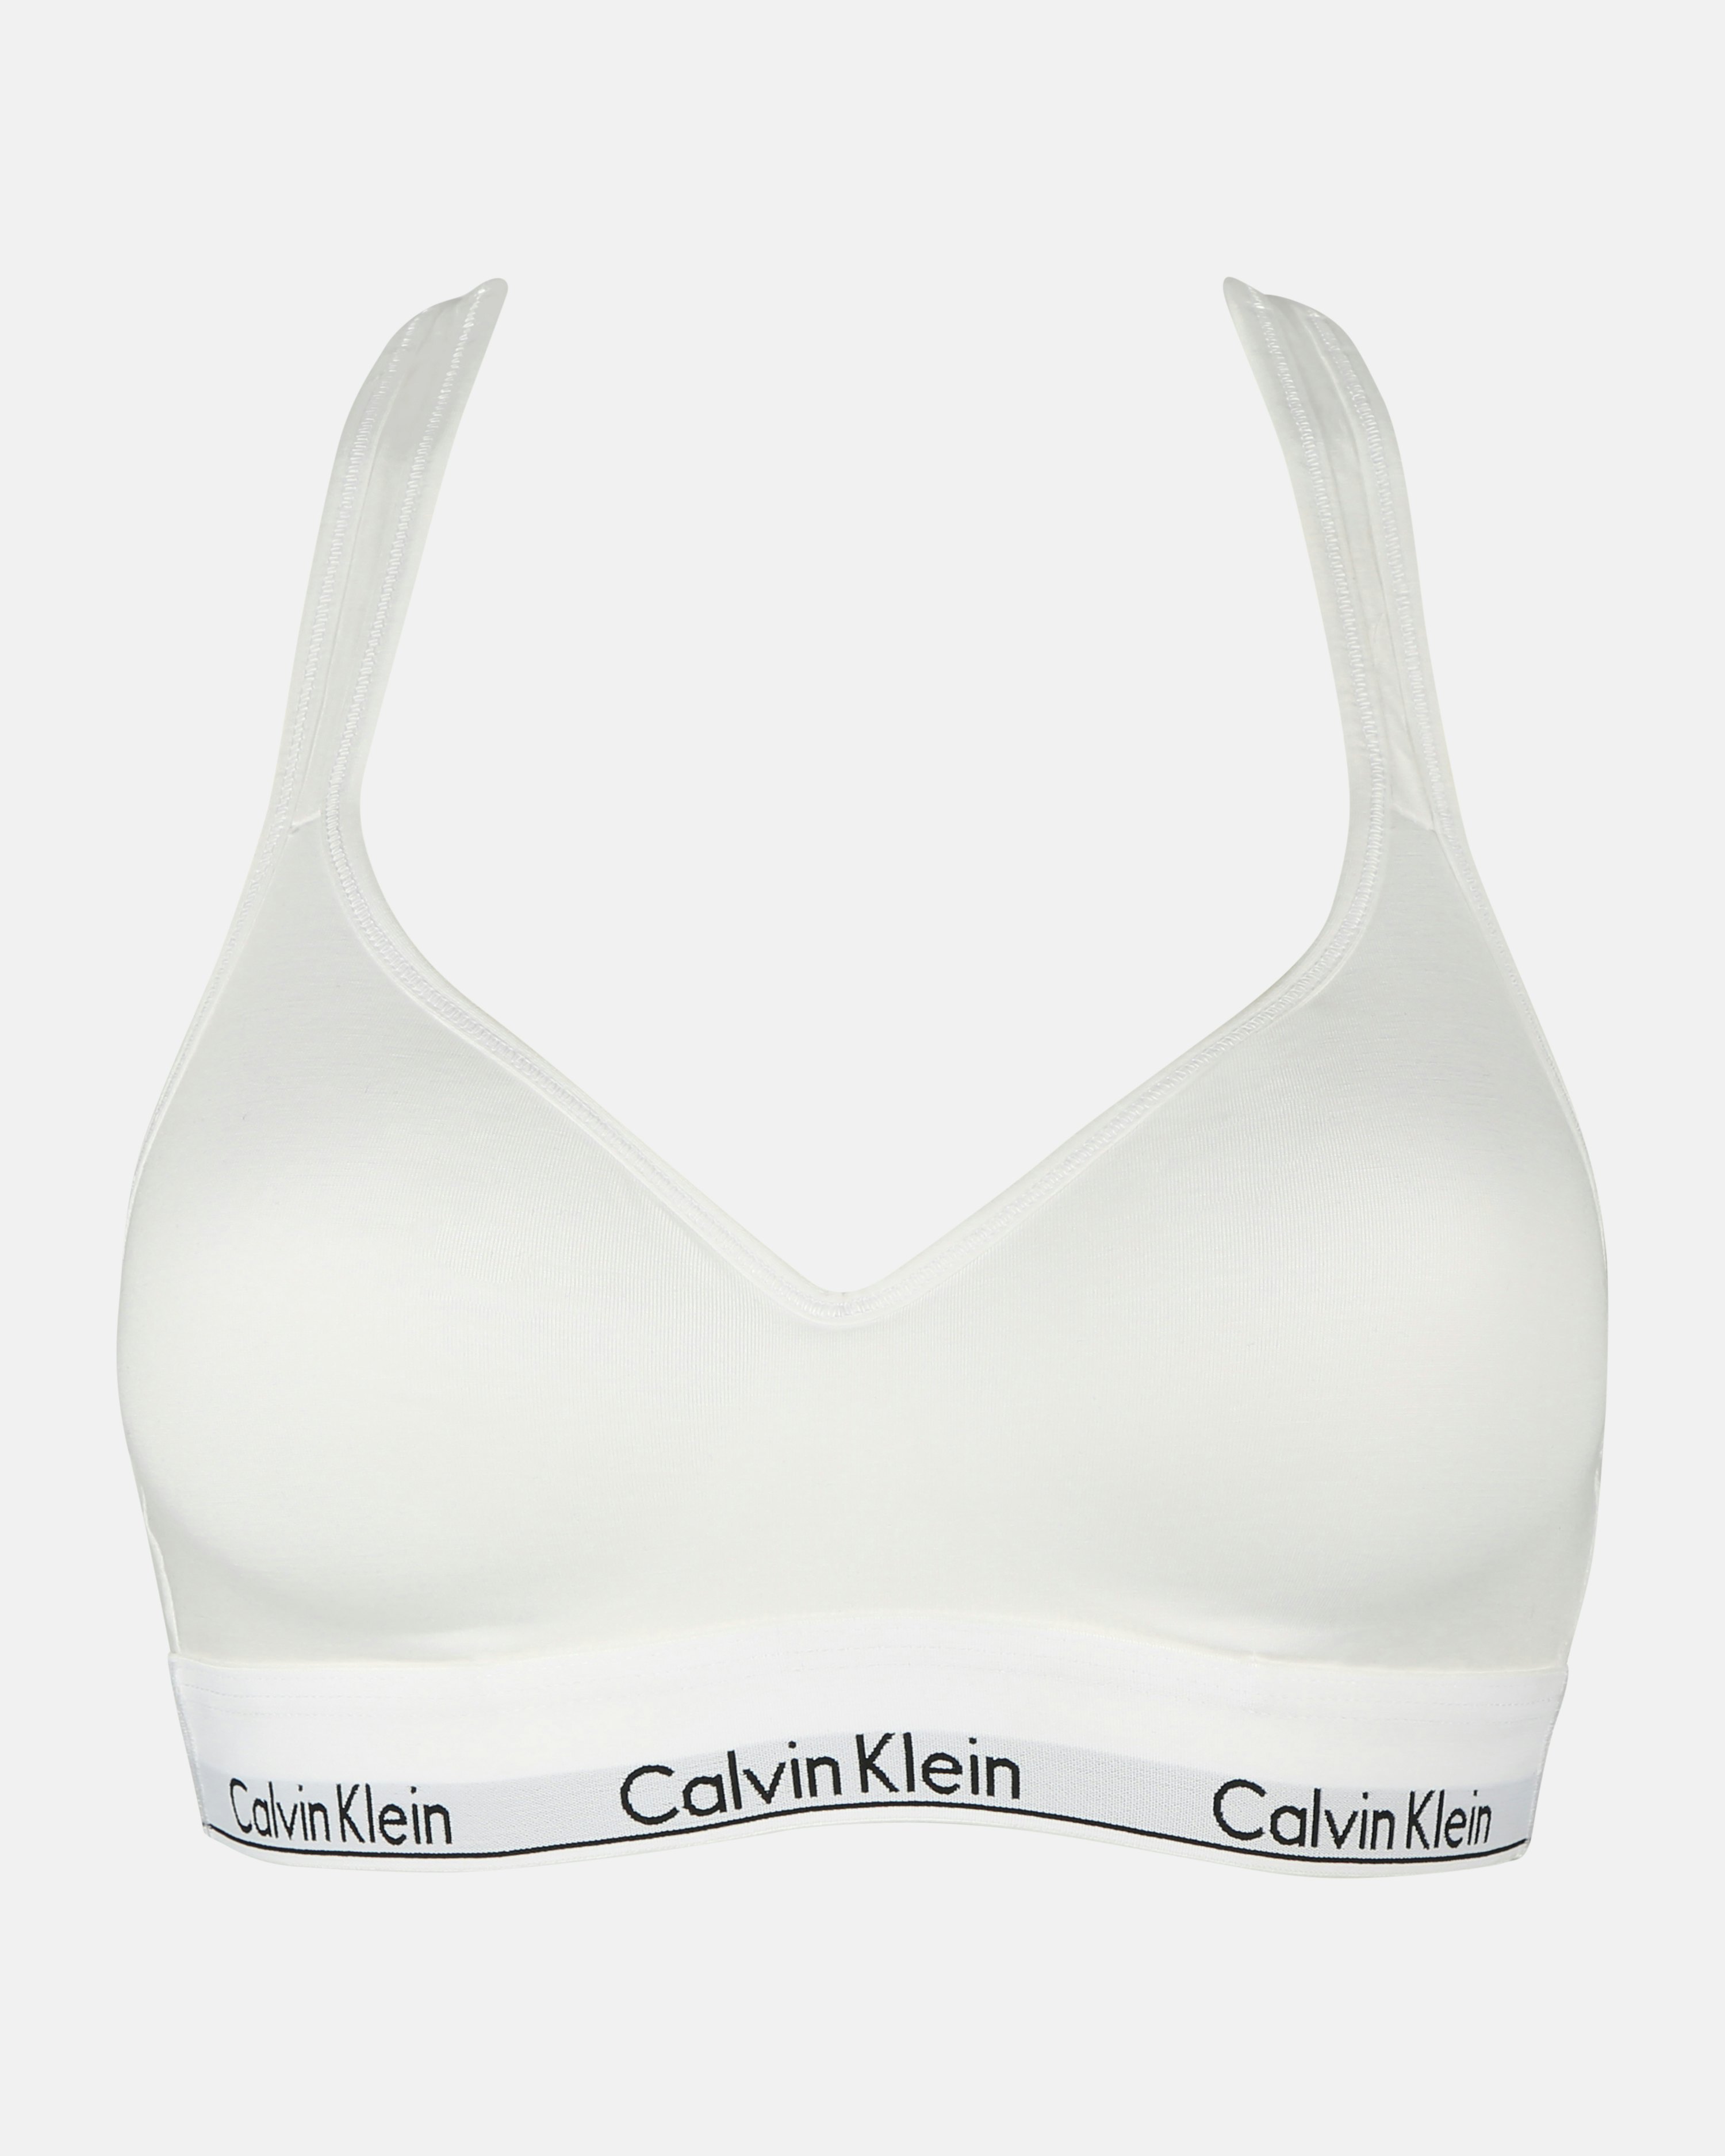 Calvin Klein Bralette Lift - Black - Size M - New with tags